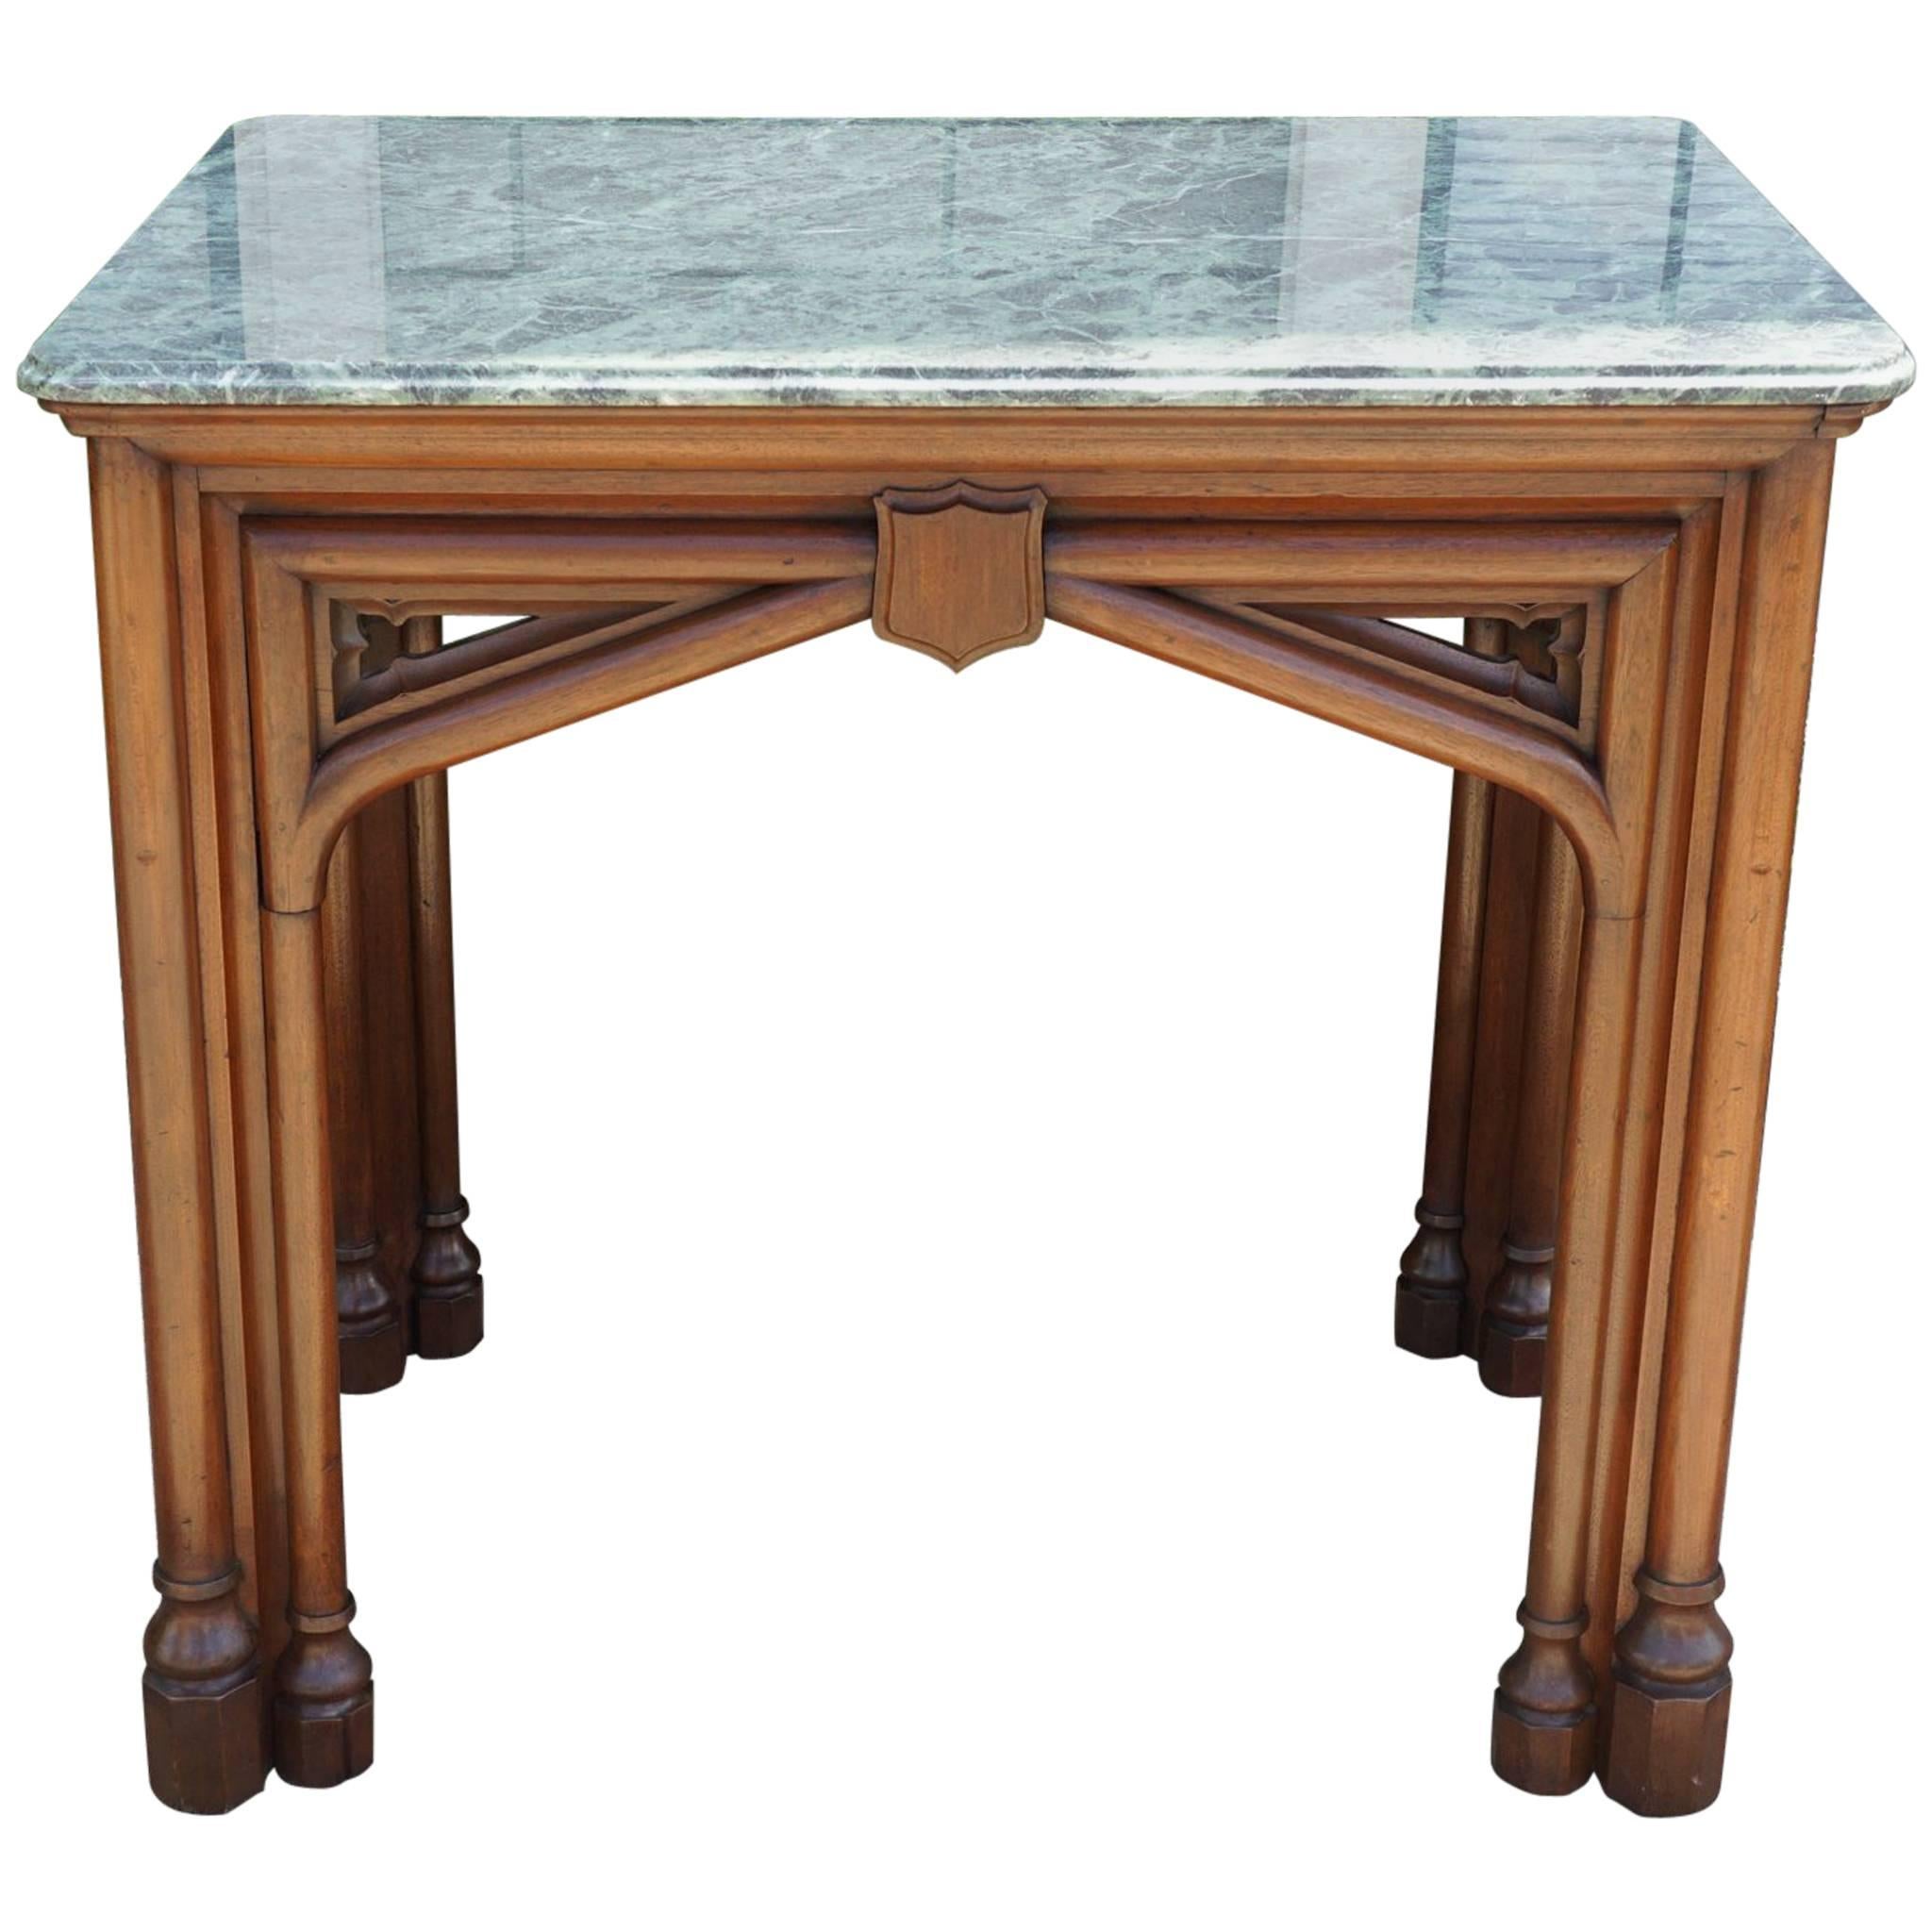 Oak 19th Century Gothic Revival English Marble Topped Centre or Library Table